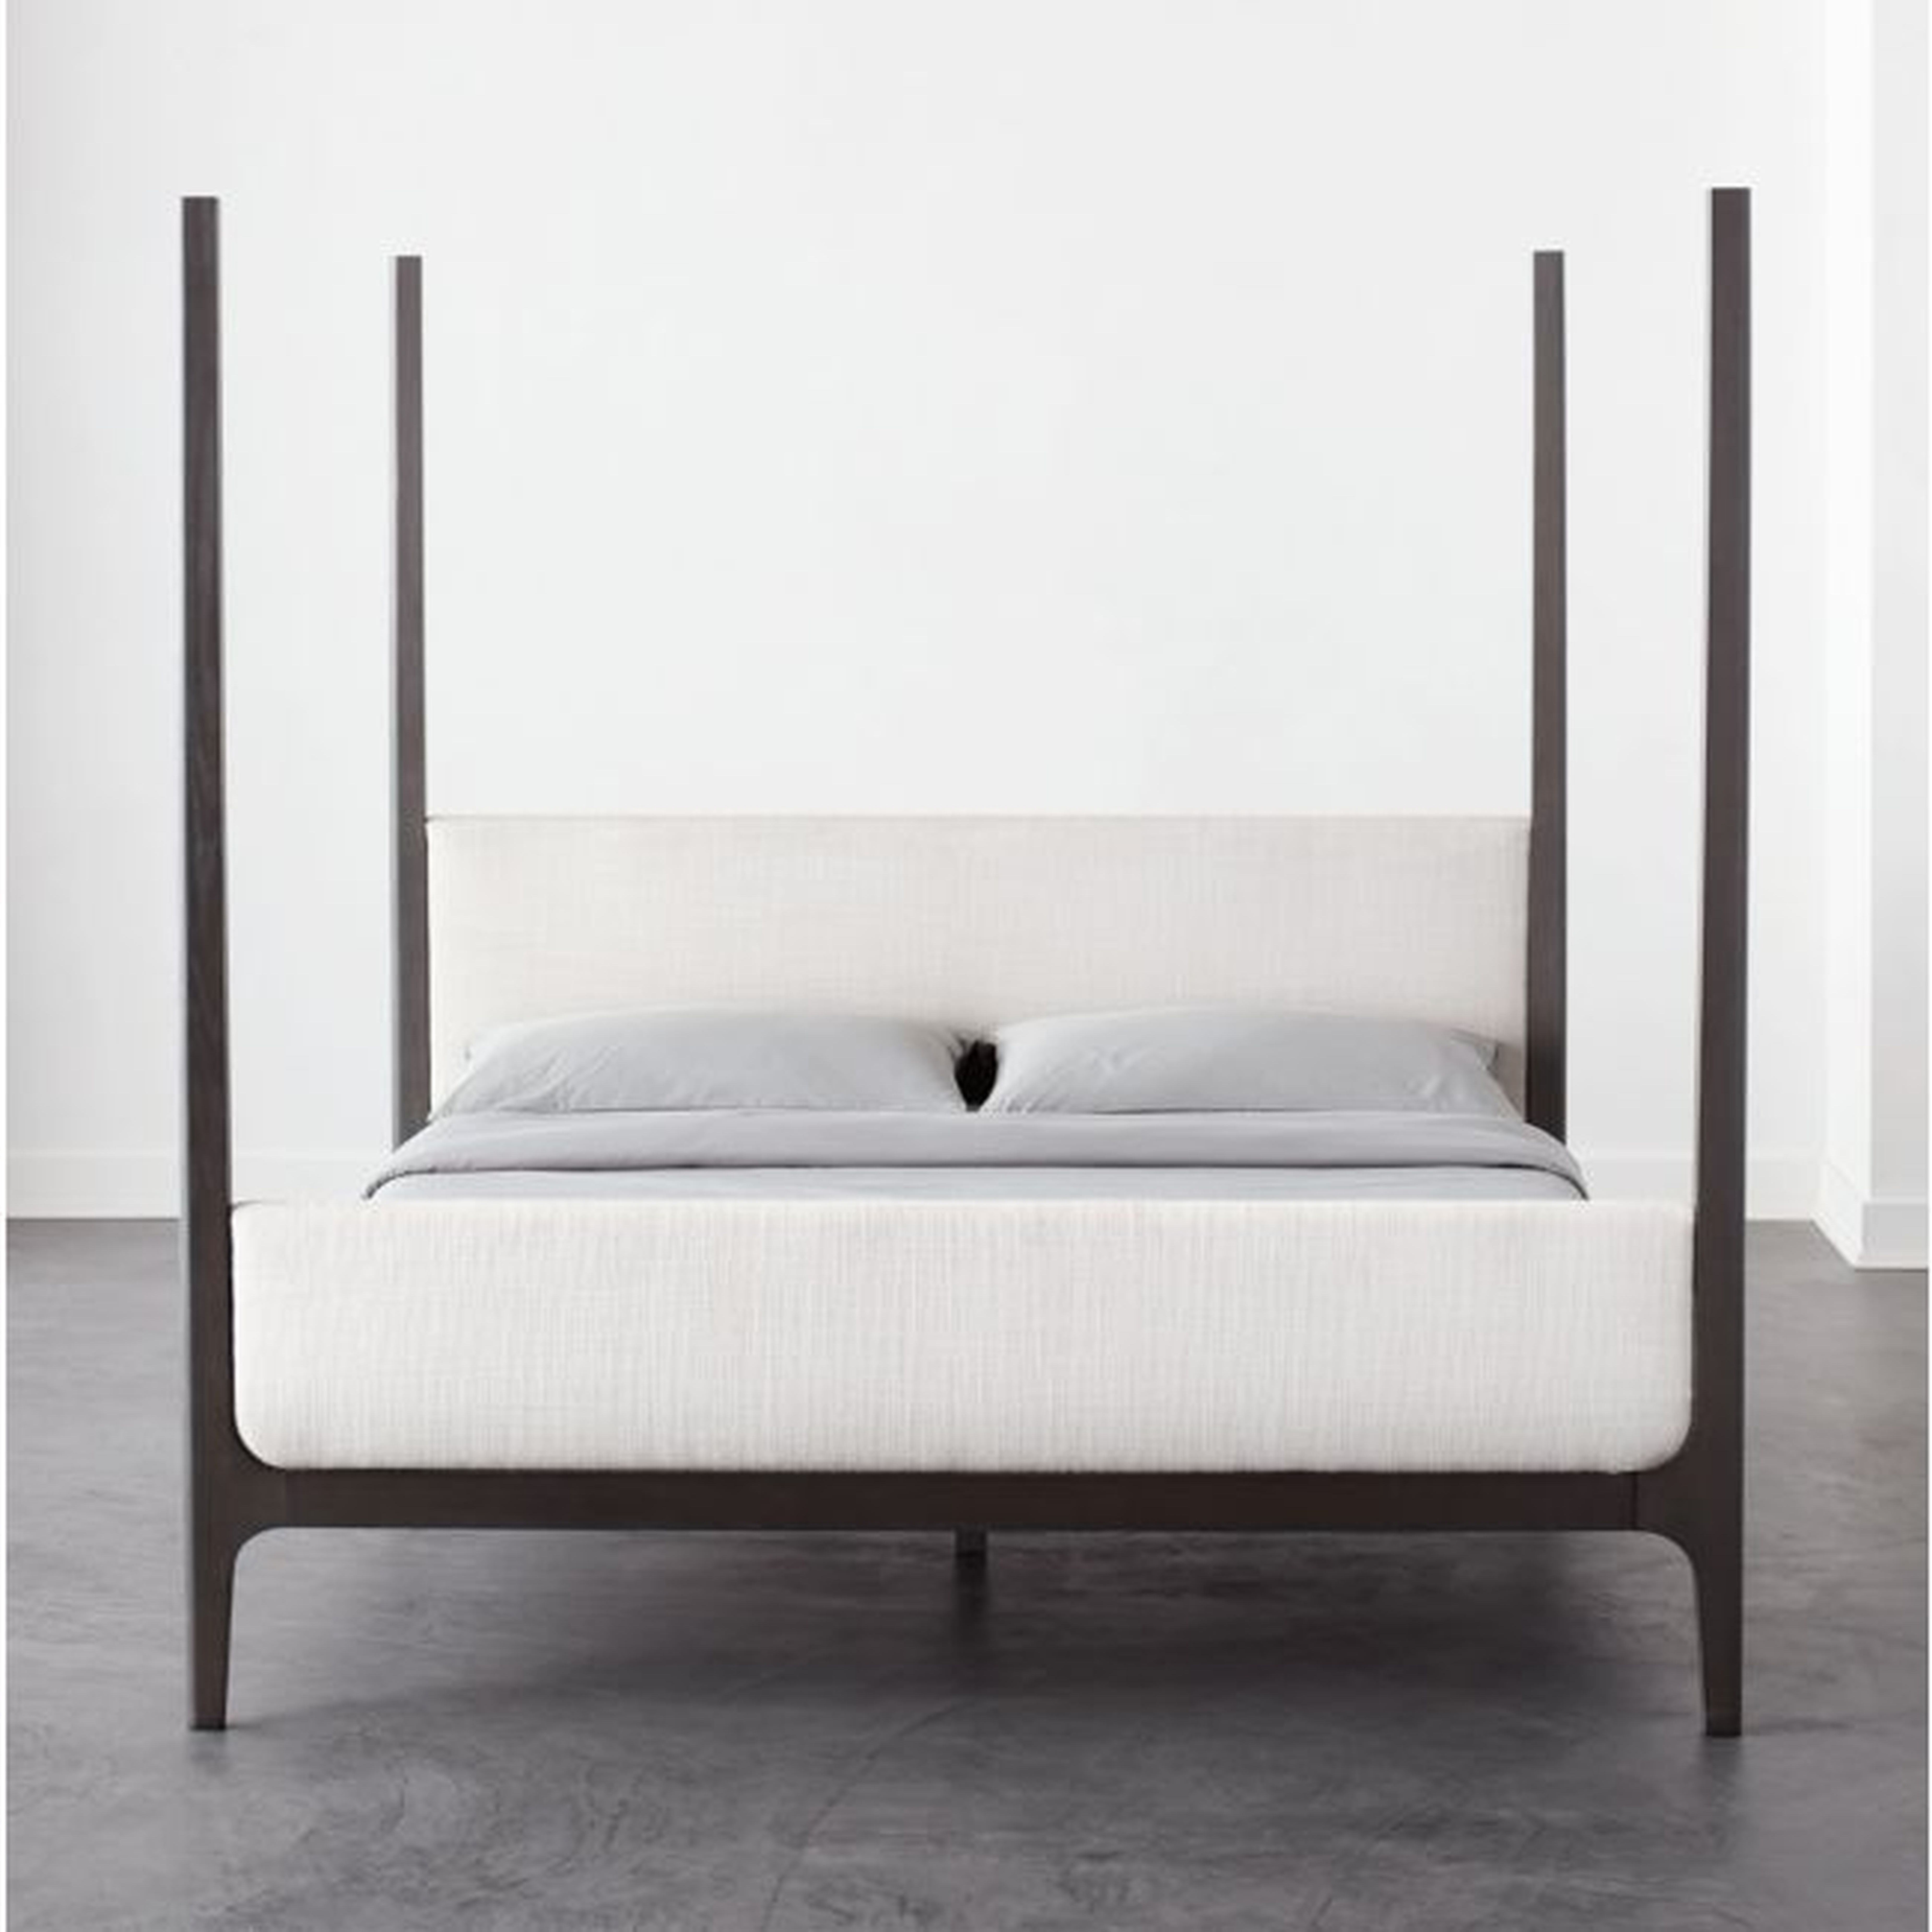 Melrose 4-Poster Charcoal Grey Canopy King Bed - CB2